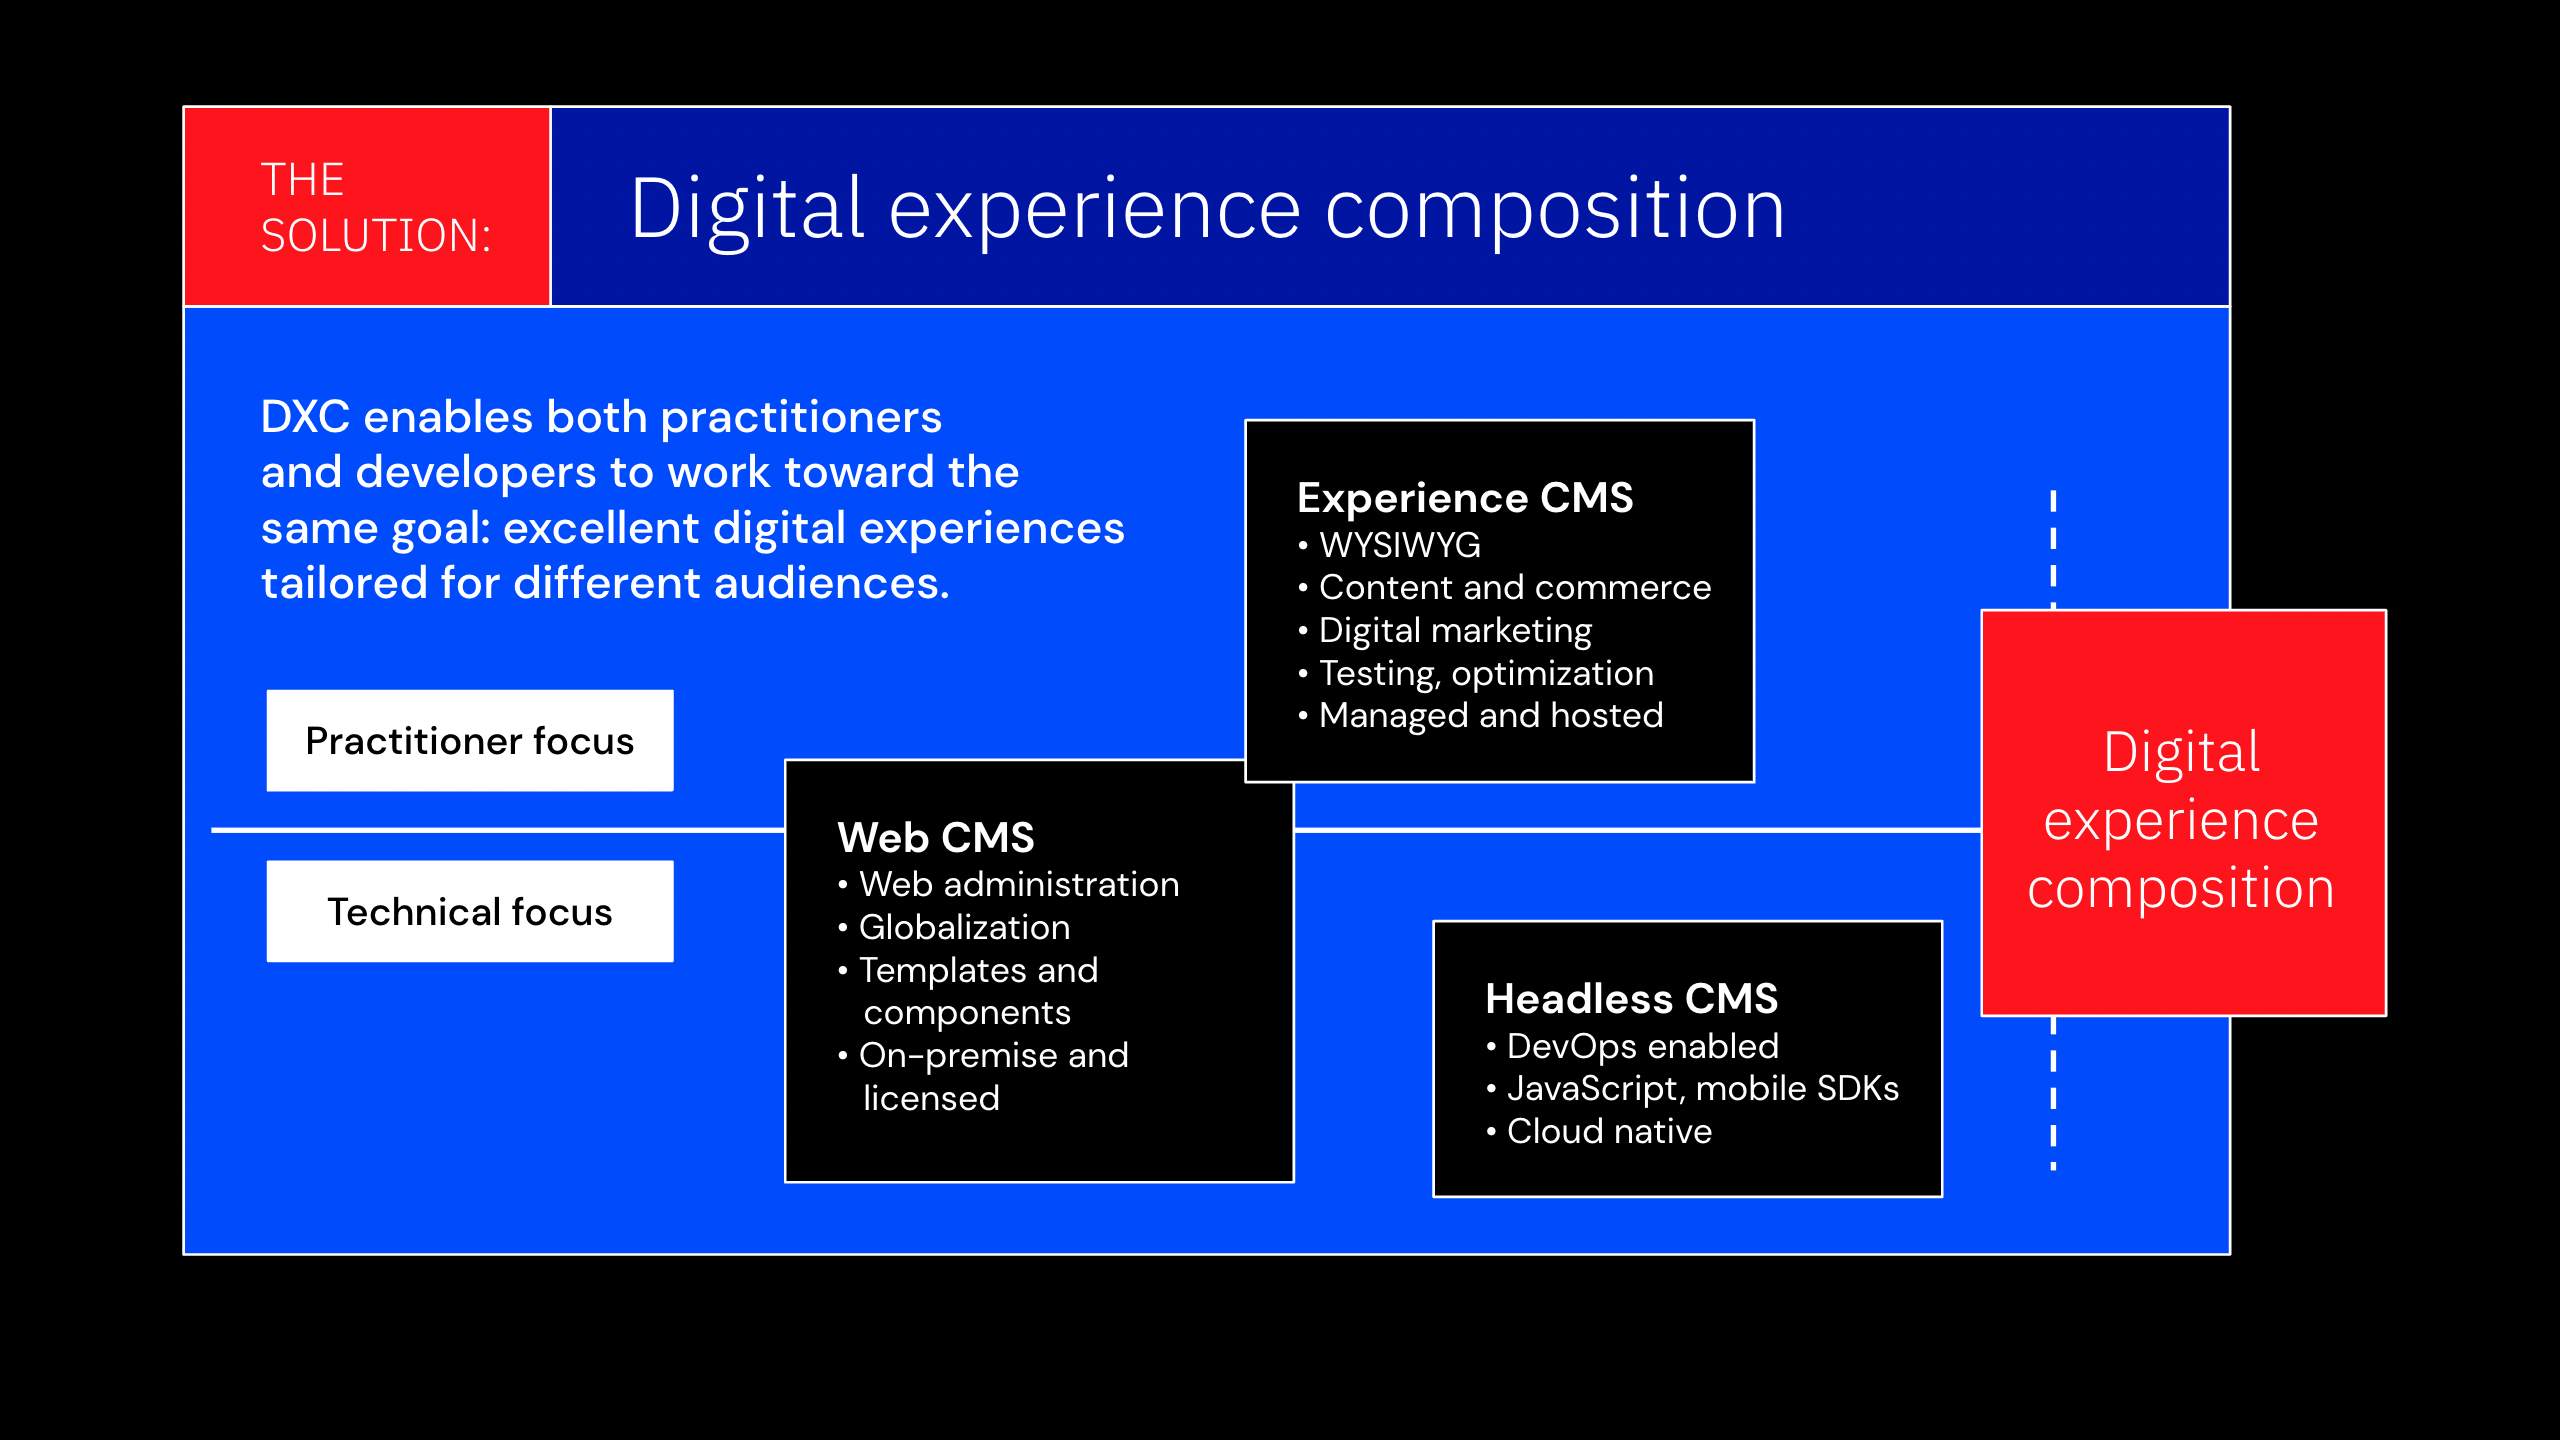 The Solution: Digital experience composition